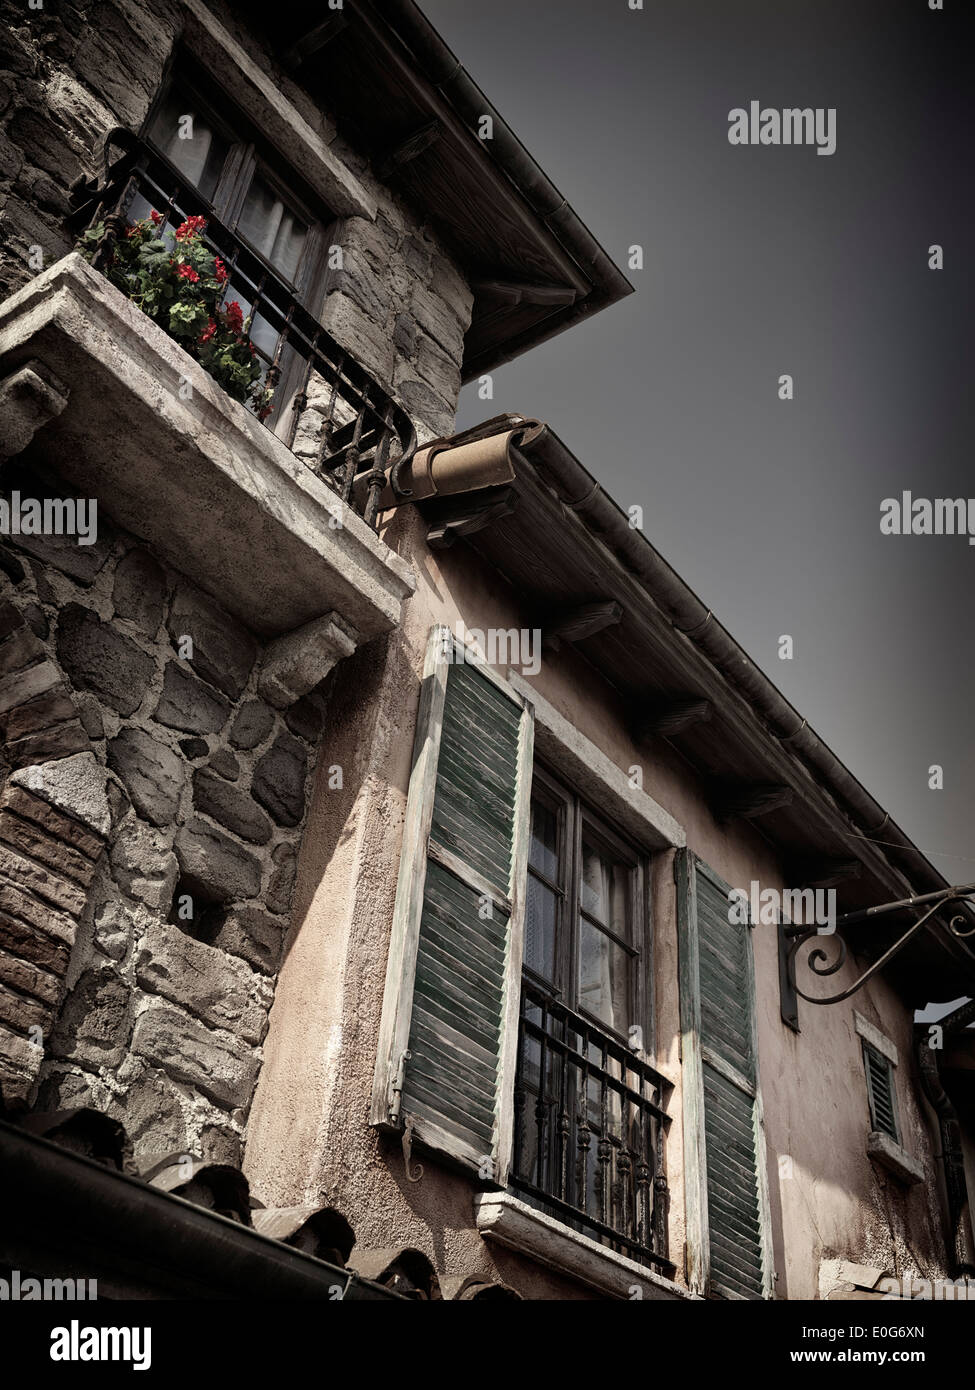 Windows of old houses, antique architecture in Venetian style Stock Photo